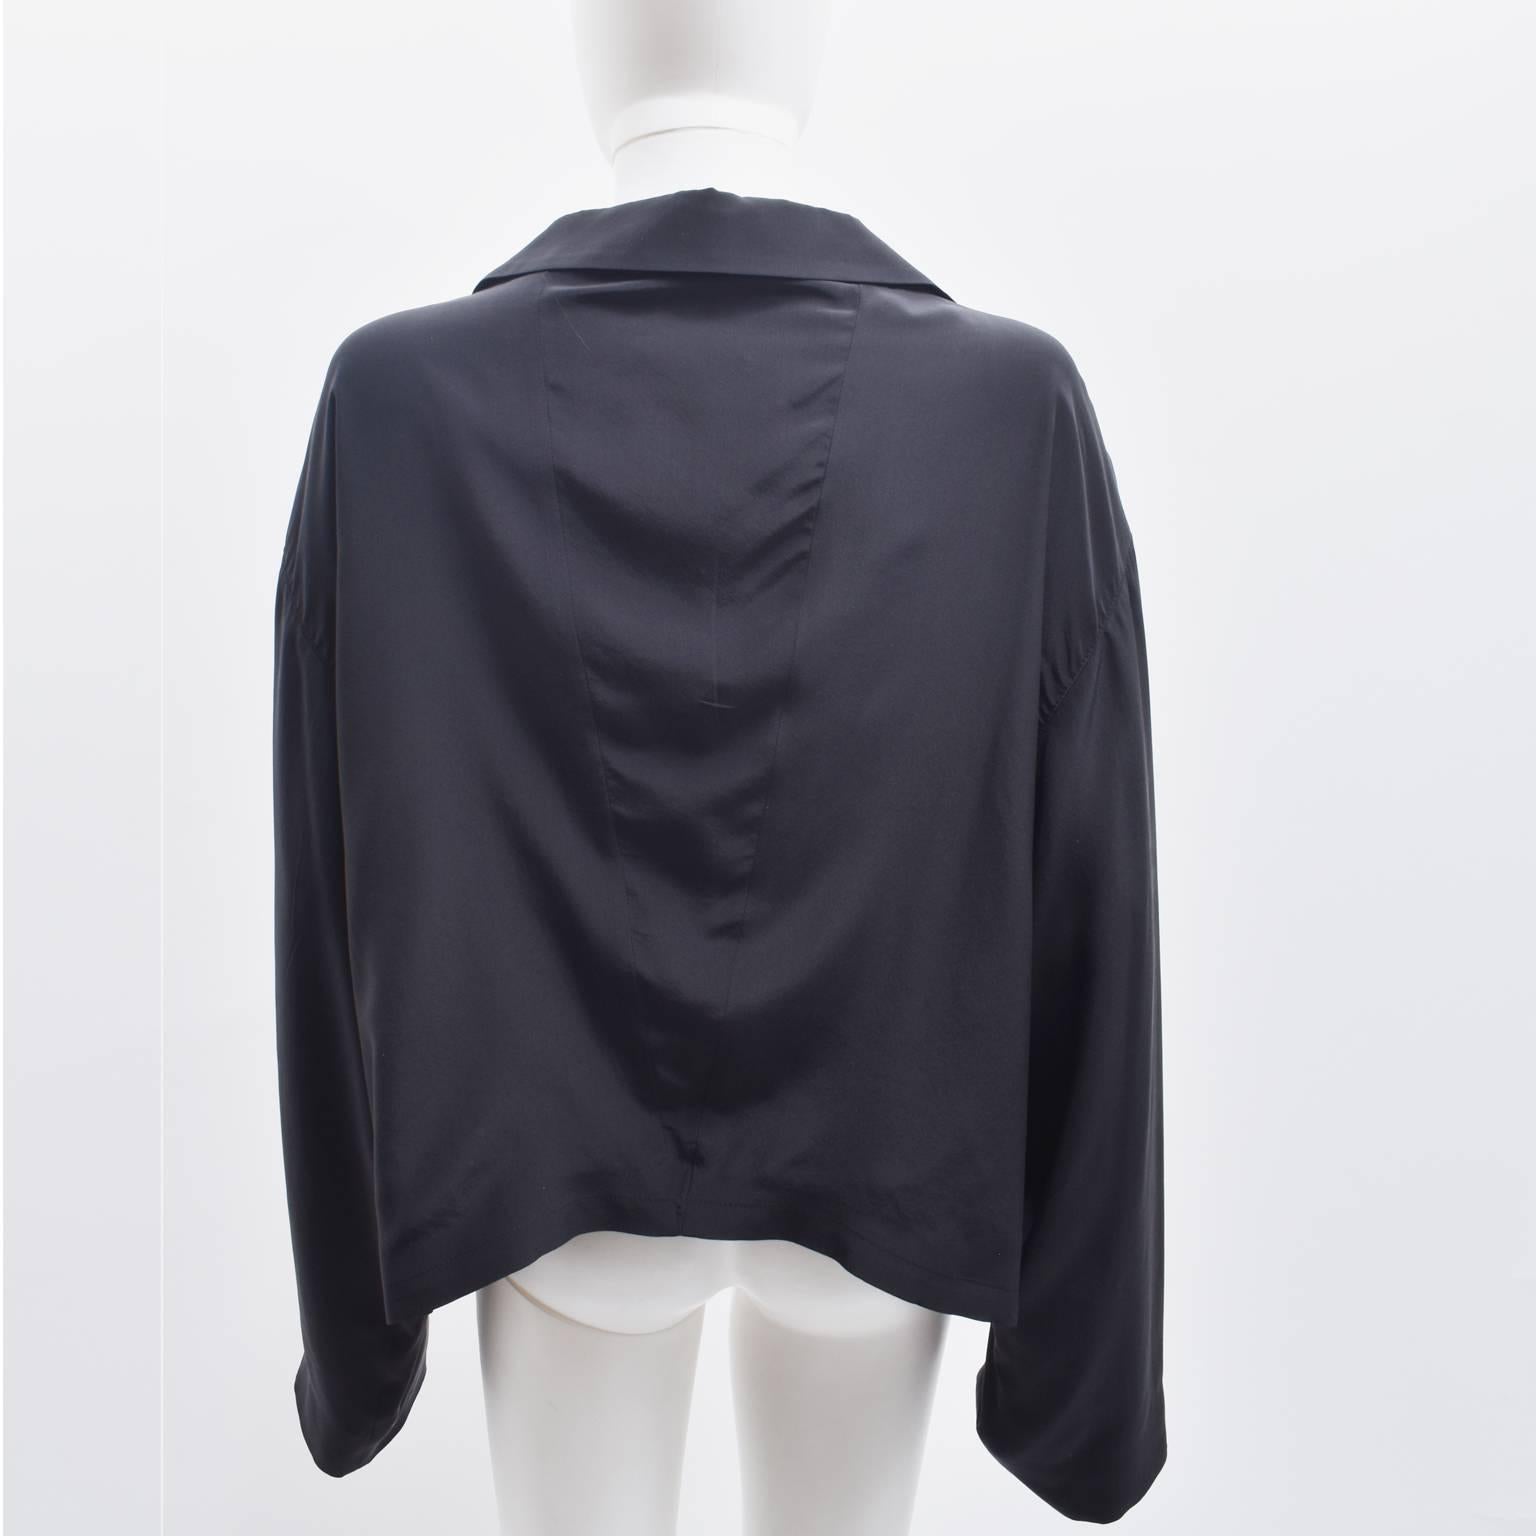  Prada Oversize Black Silk Boxy Tuxedo Jacket In Excellent Condition For Sale In London, GB